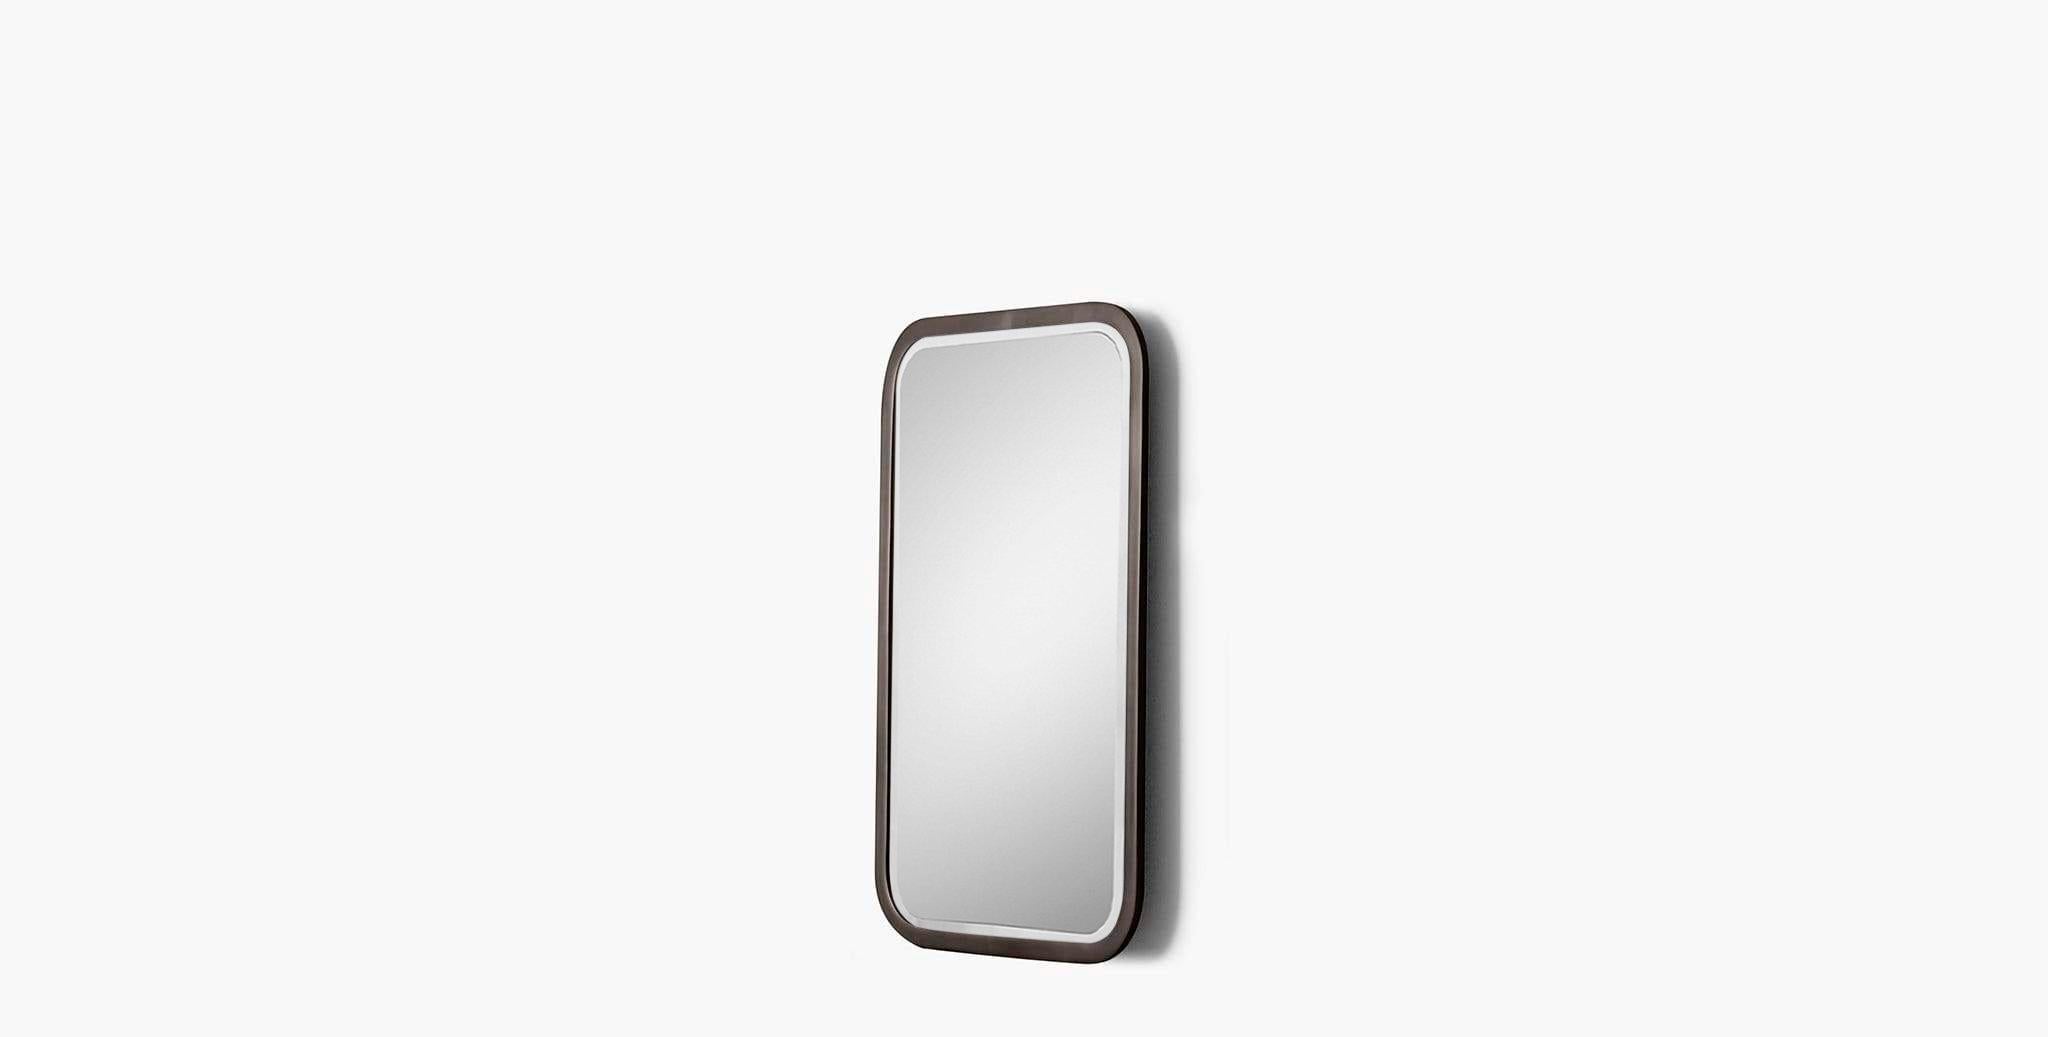 Our Fenne Wall Mirror has a rounded rectangle form outlined in a metallic frame, providing a refreshing curved element to your space that is refined and modern. Our handcrafted finishes are inspired by variations within natural textures. Each